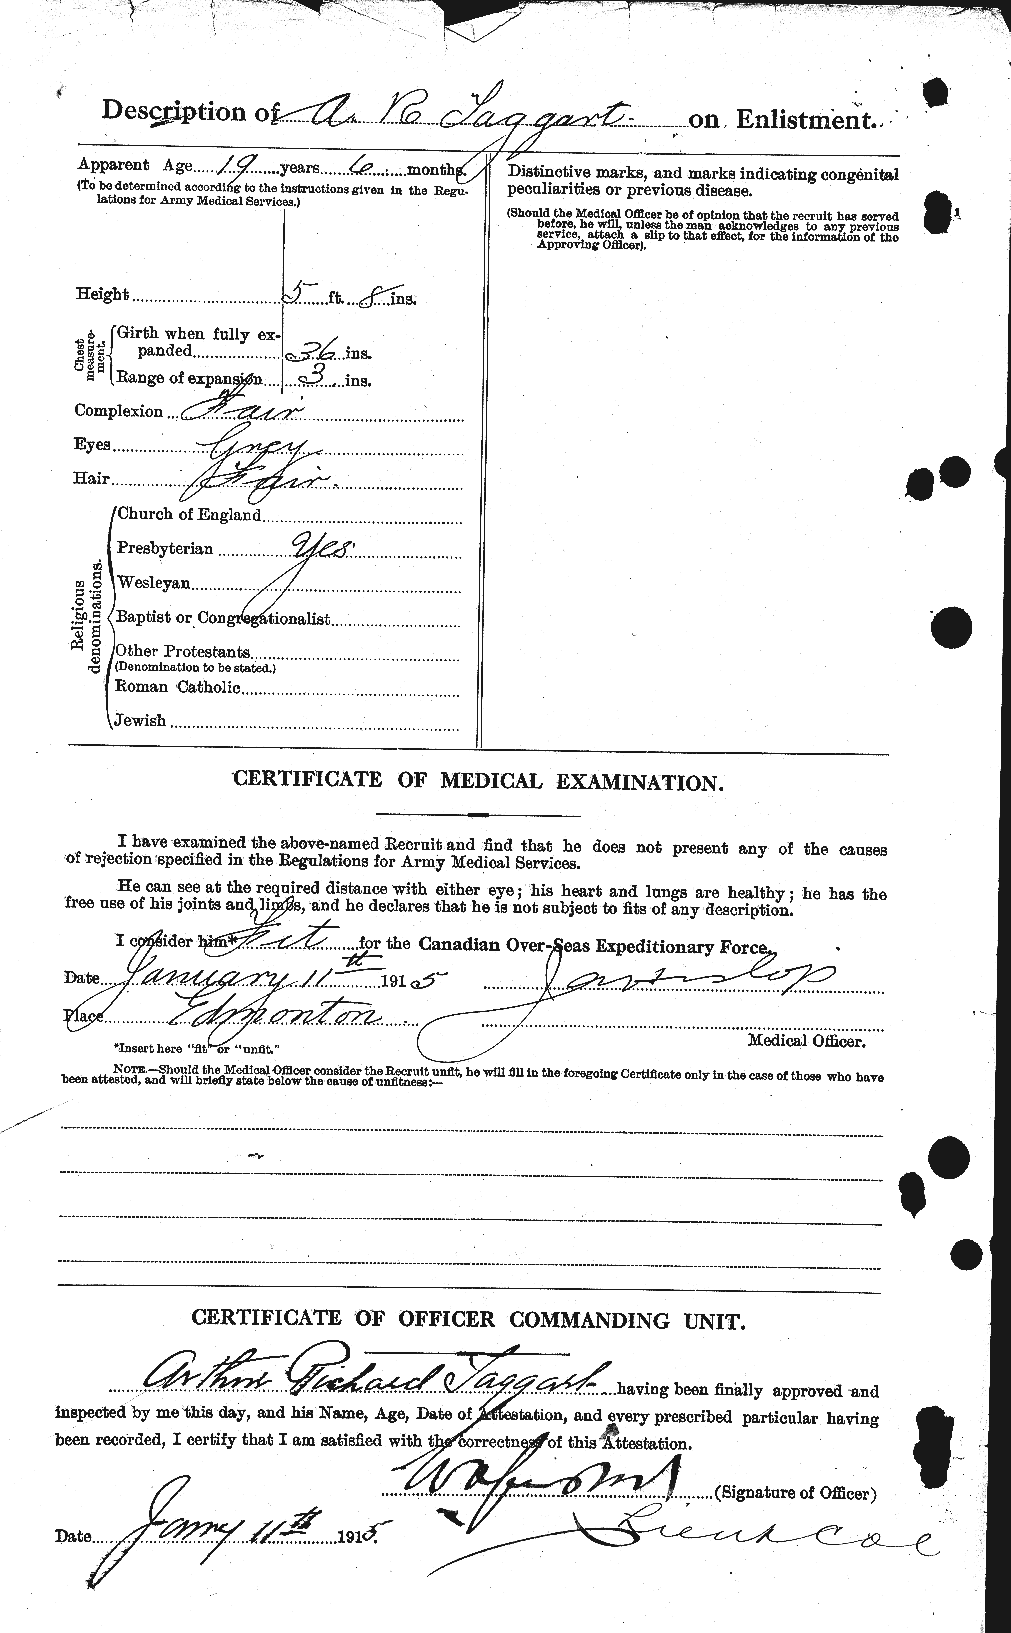 Personnel Records of the First World War - CEF 127686b